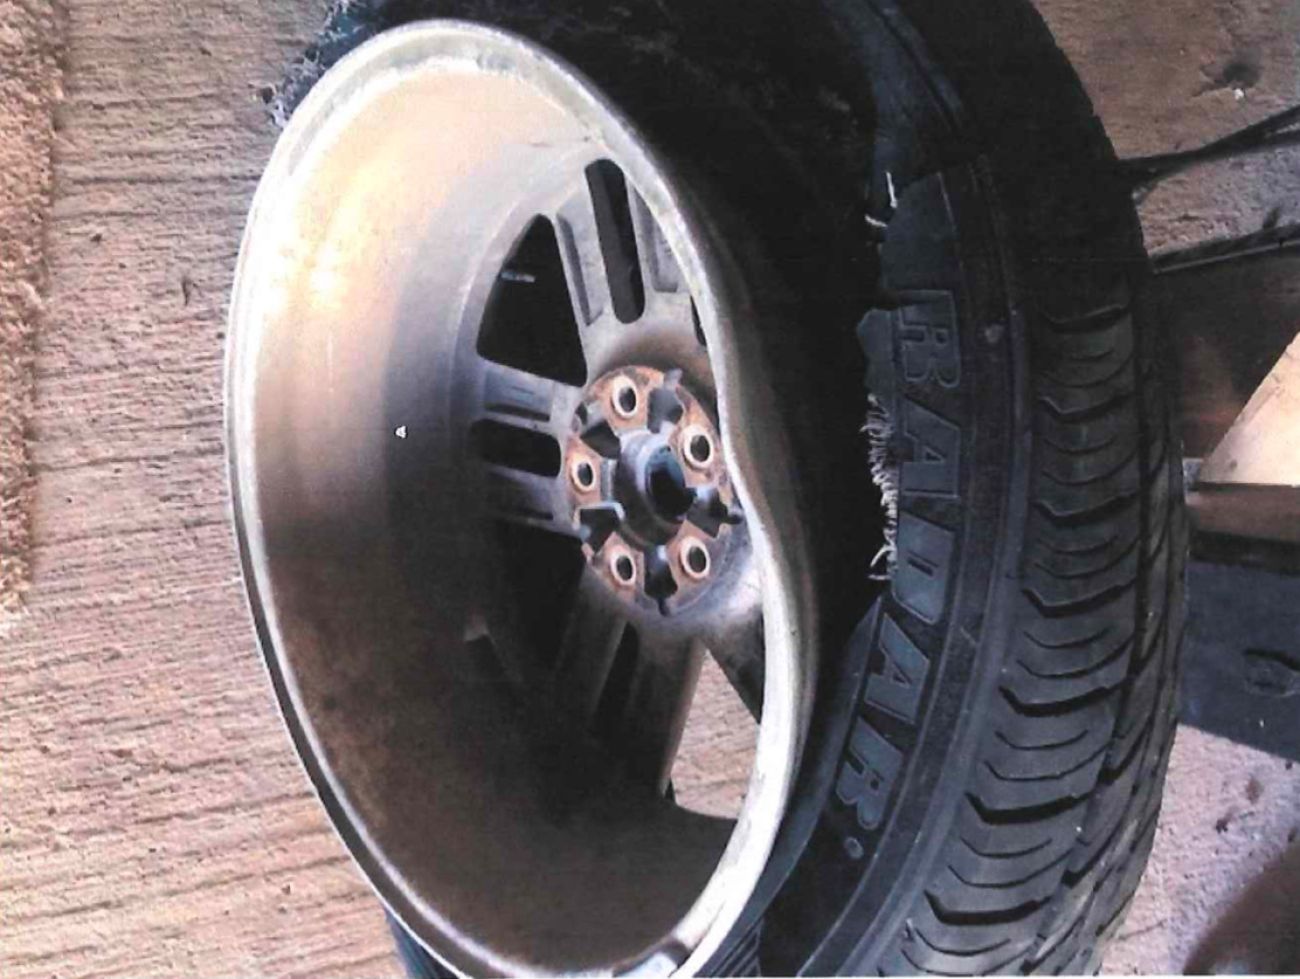 ripped tire